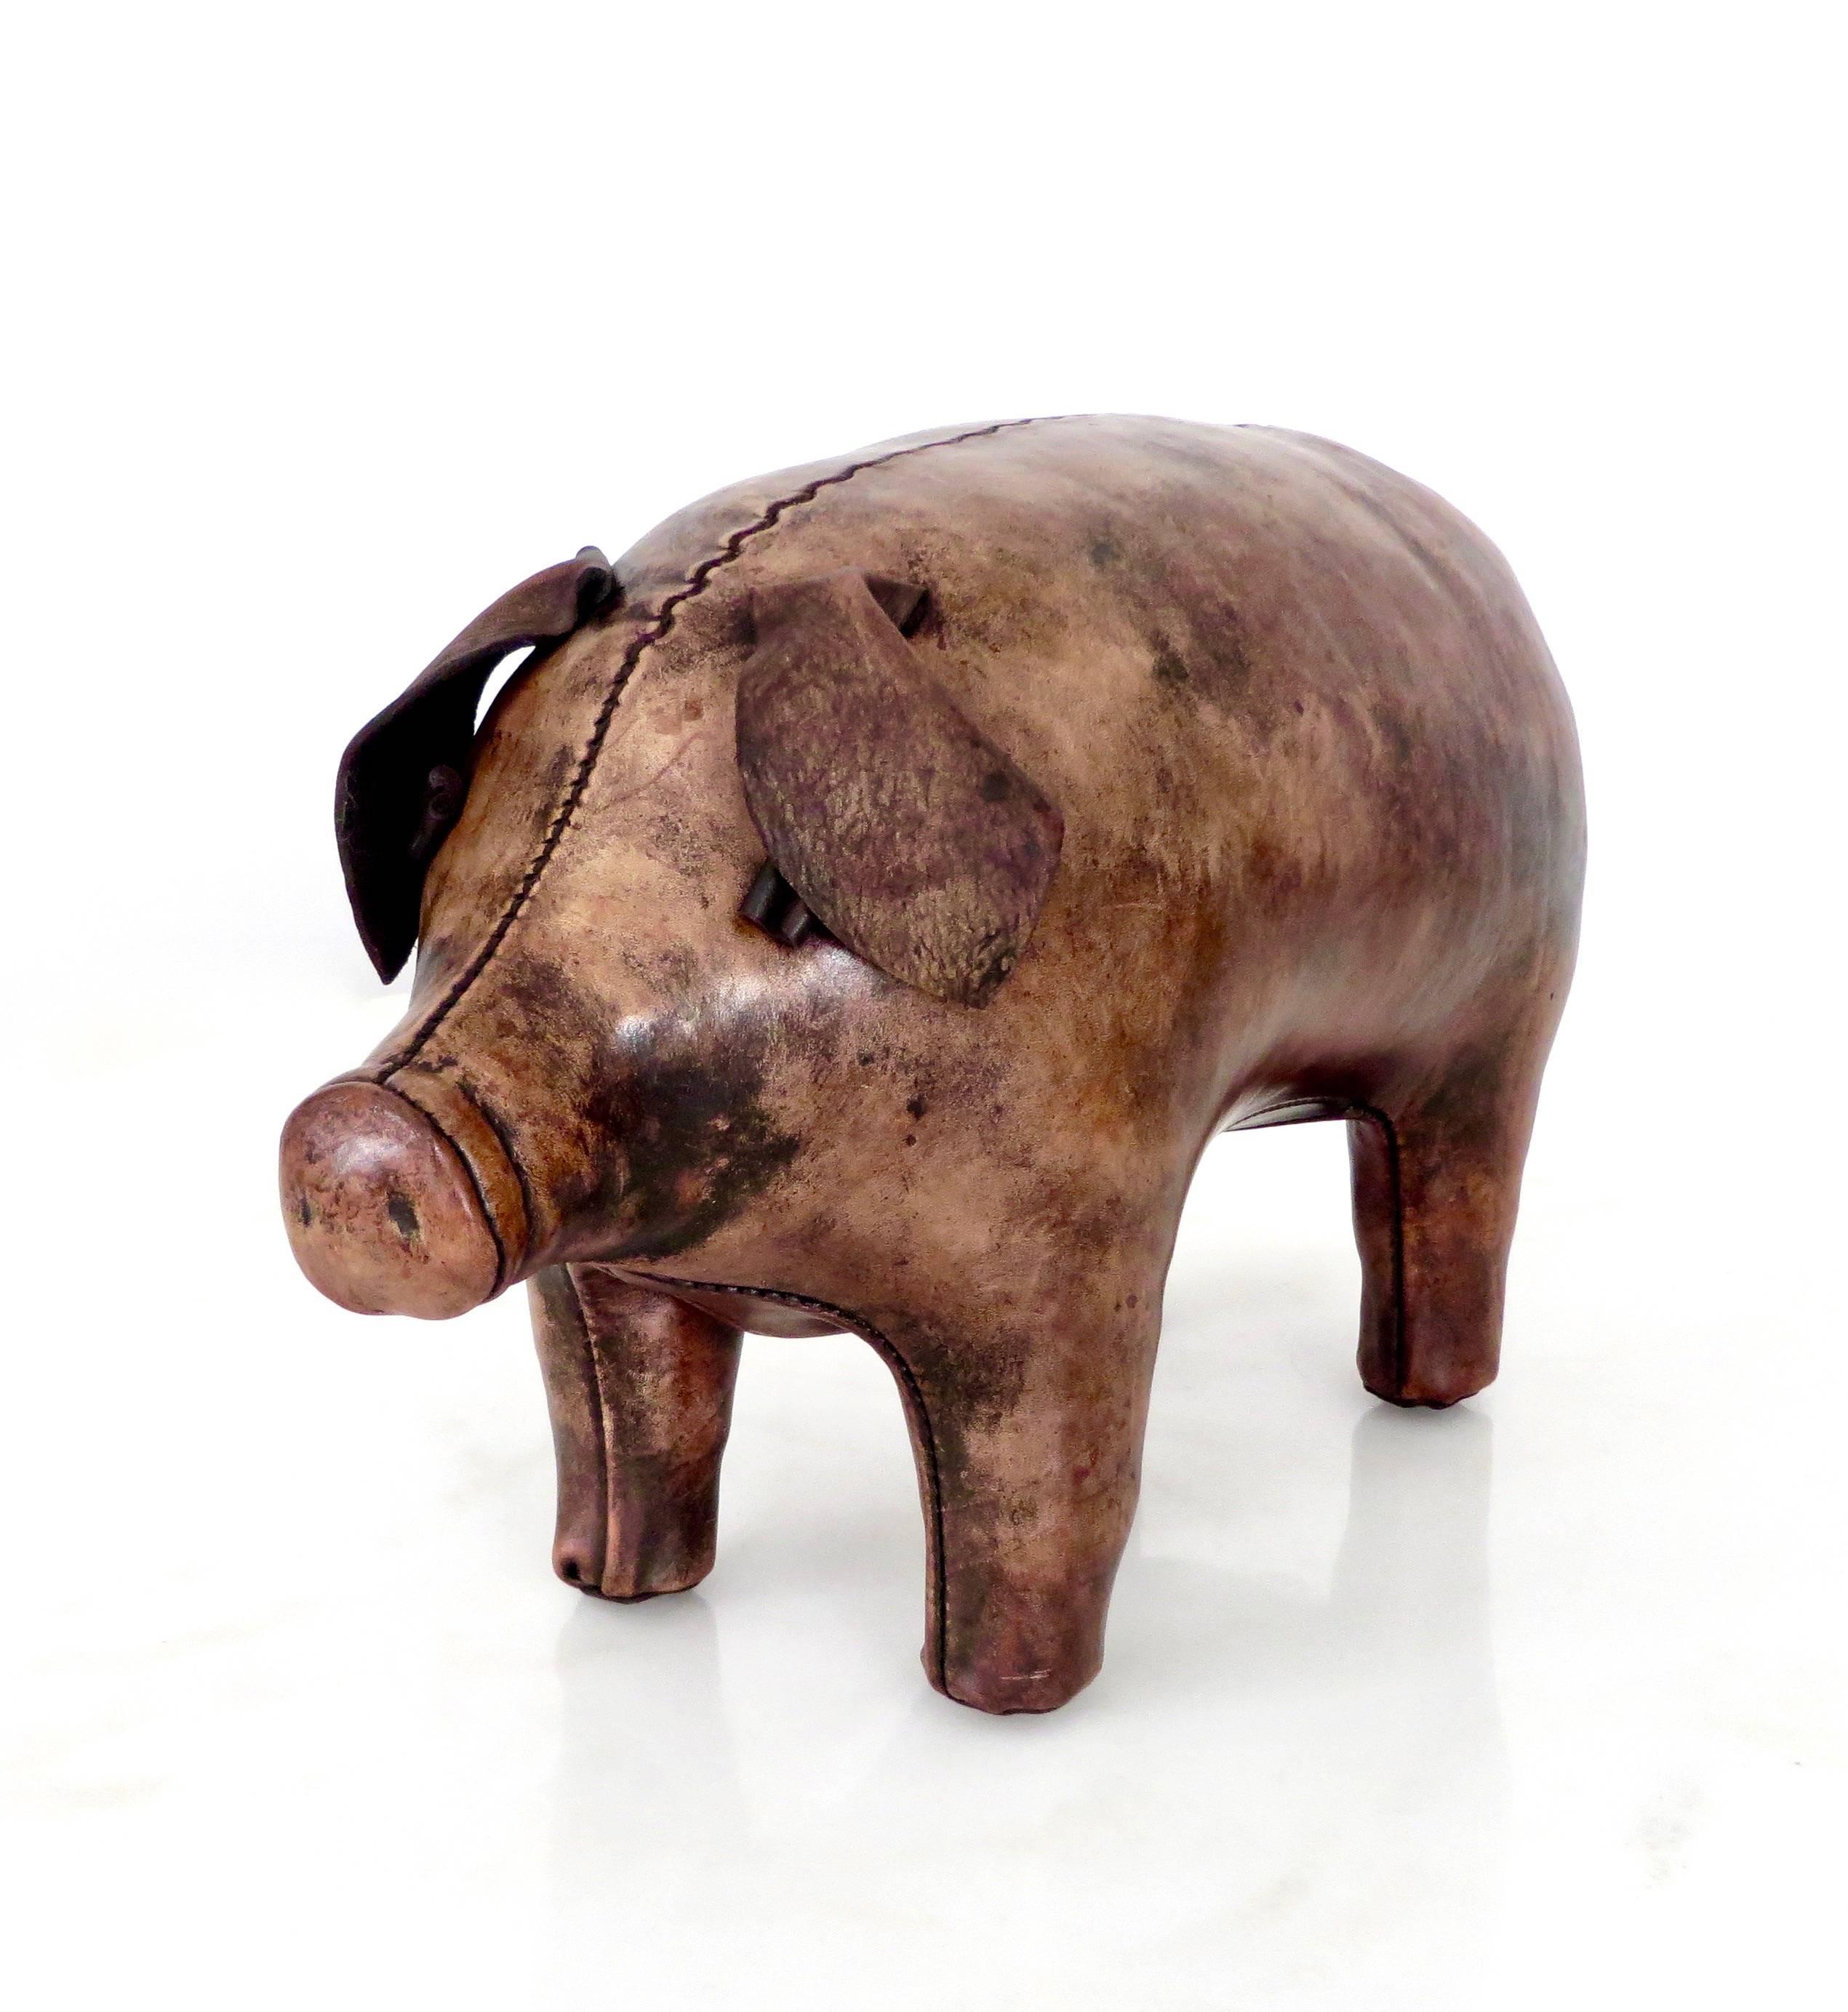 An example of the animal footstools designed by Dimitri Omersa of Liberty and retailed by Abercrombie & Fitch in the United States, the pig was the first design of the company. It is entirely stitched and fabricated by hand with beautifully finished